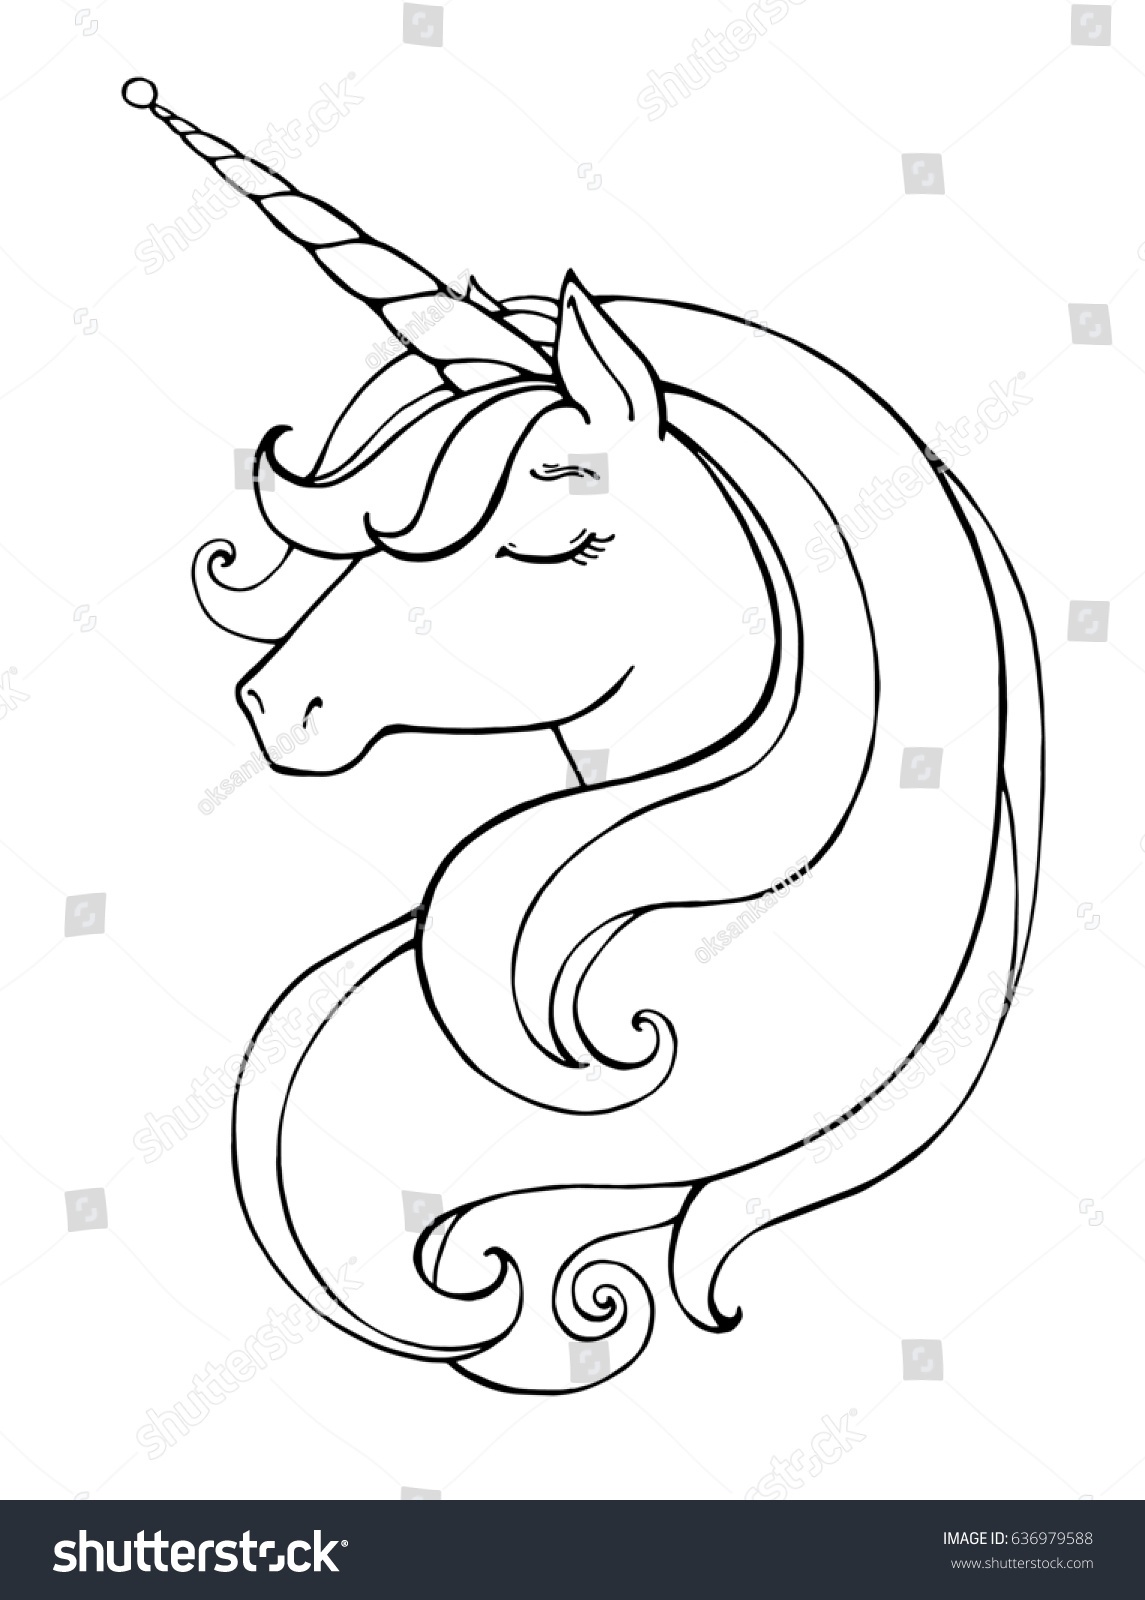 Free Printable Unicorn Coloring Pages - Coloring Pages For Kids - Free Printable Unicorn Coloring Pages